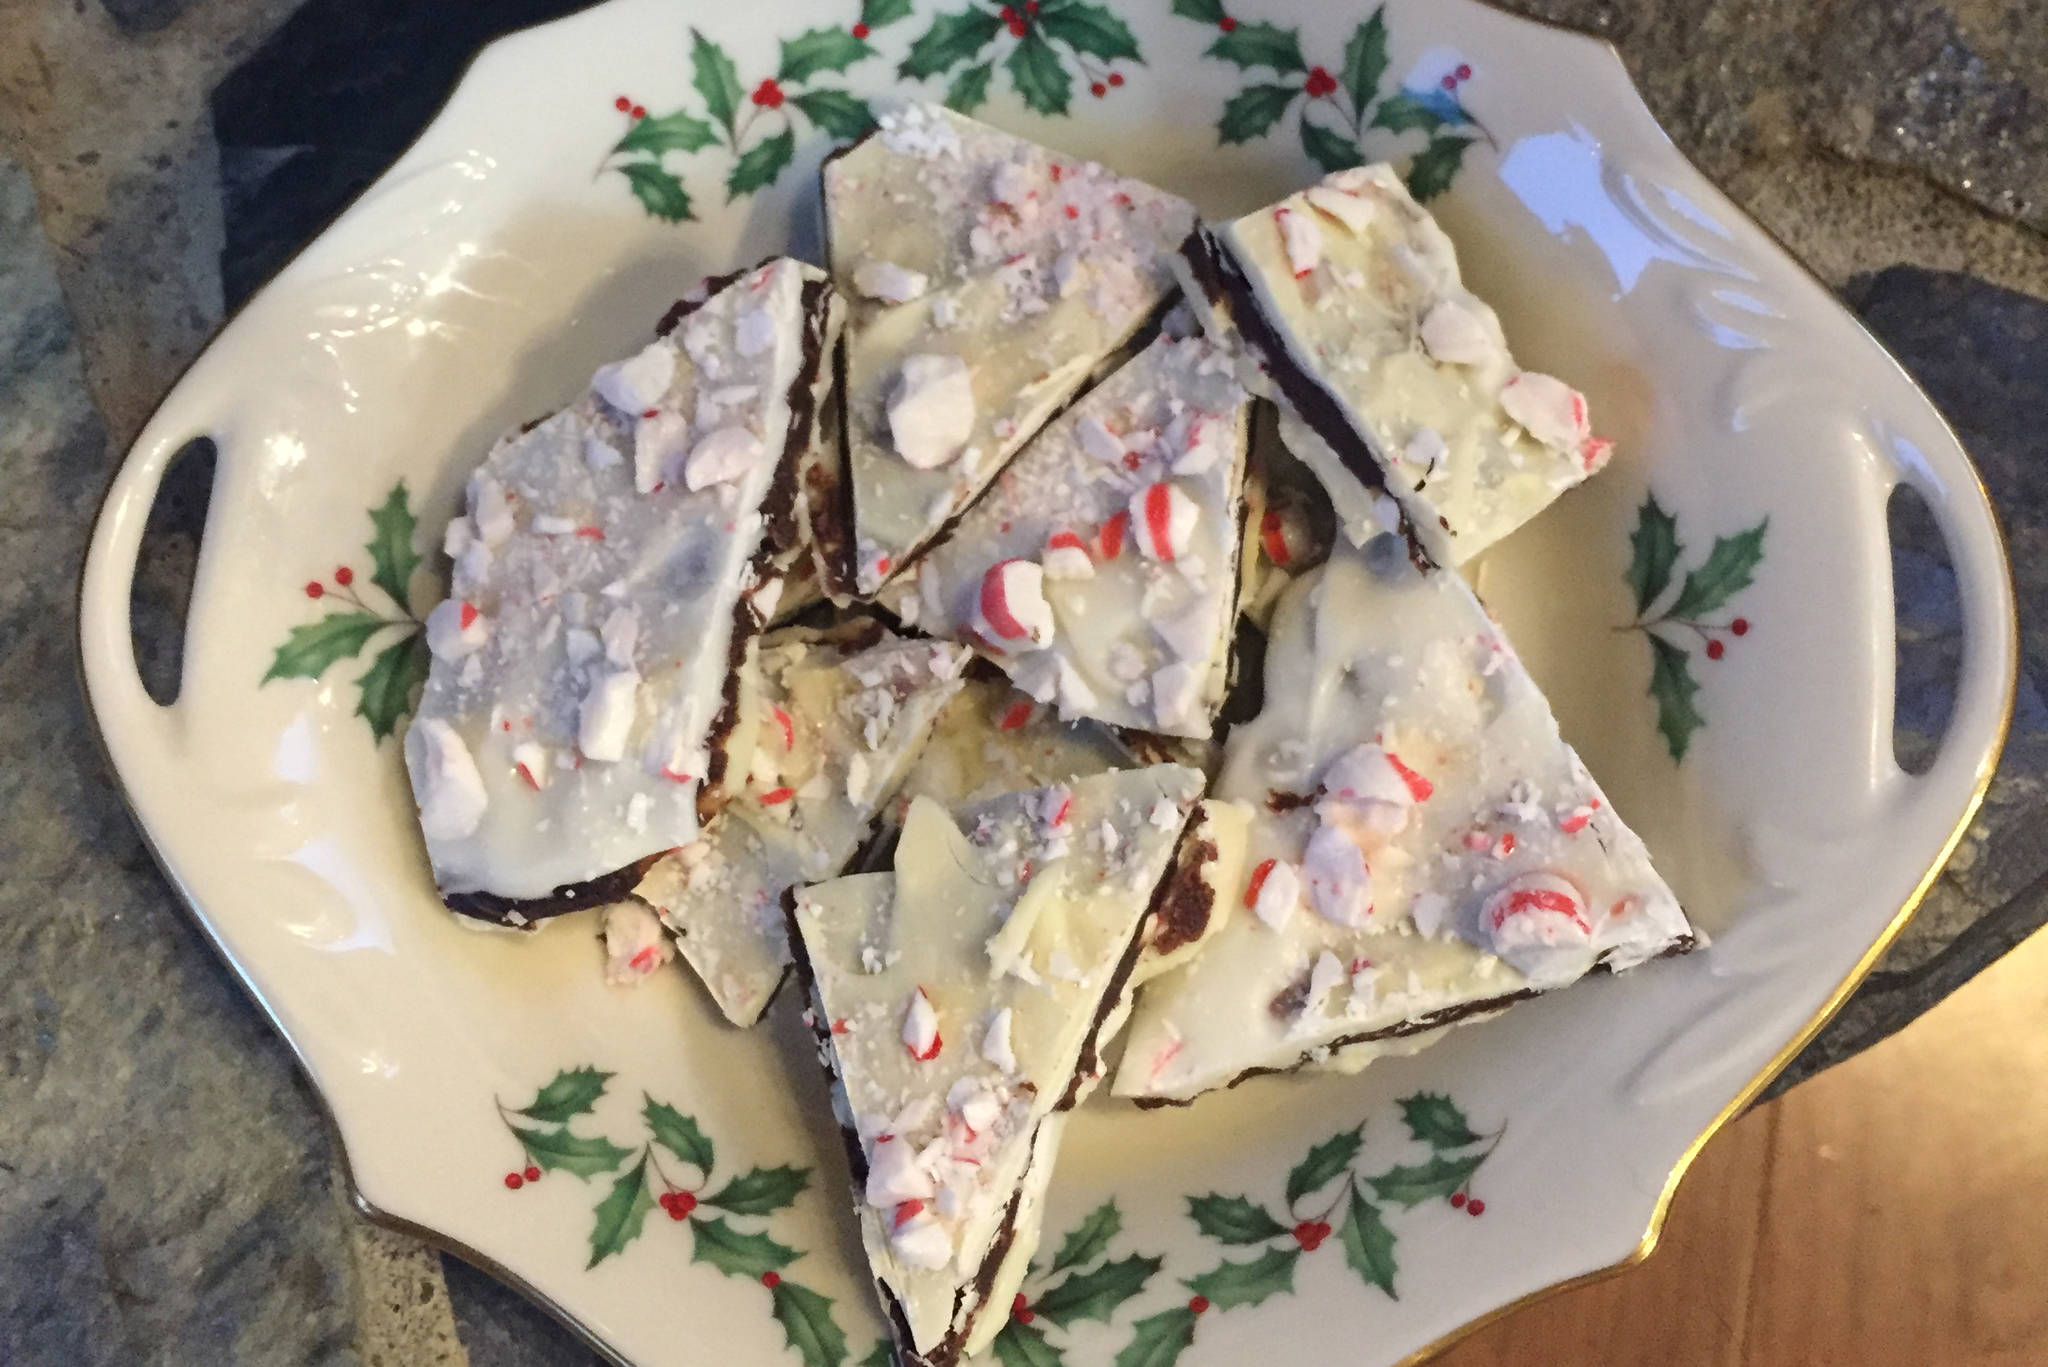 Three-layer peppermint bark is a Christmas treat. (Photo by Teri Robl/Homer News)